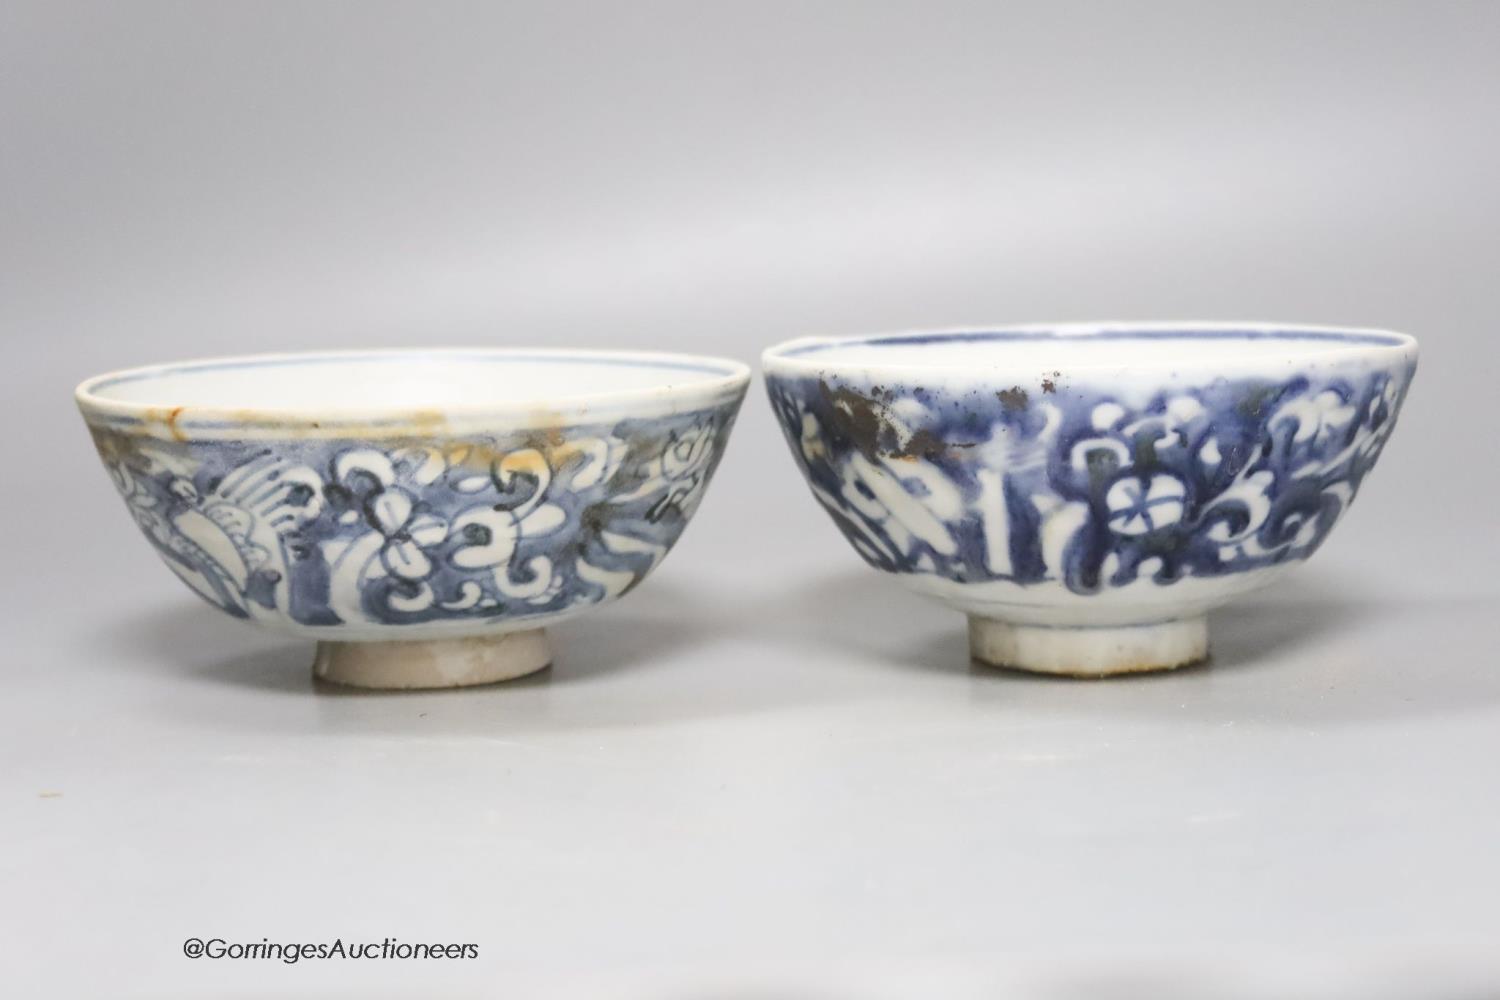 A pair of Chinese blue and white porcelain shipwreck bowls, 17th-century, diameter 15cm - Image 3 of 4